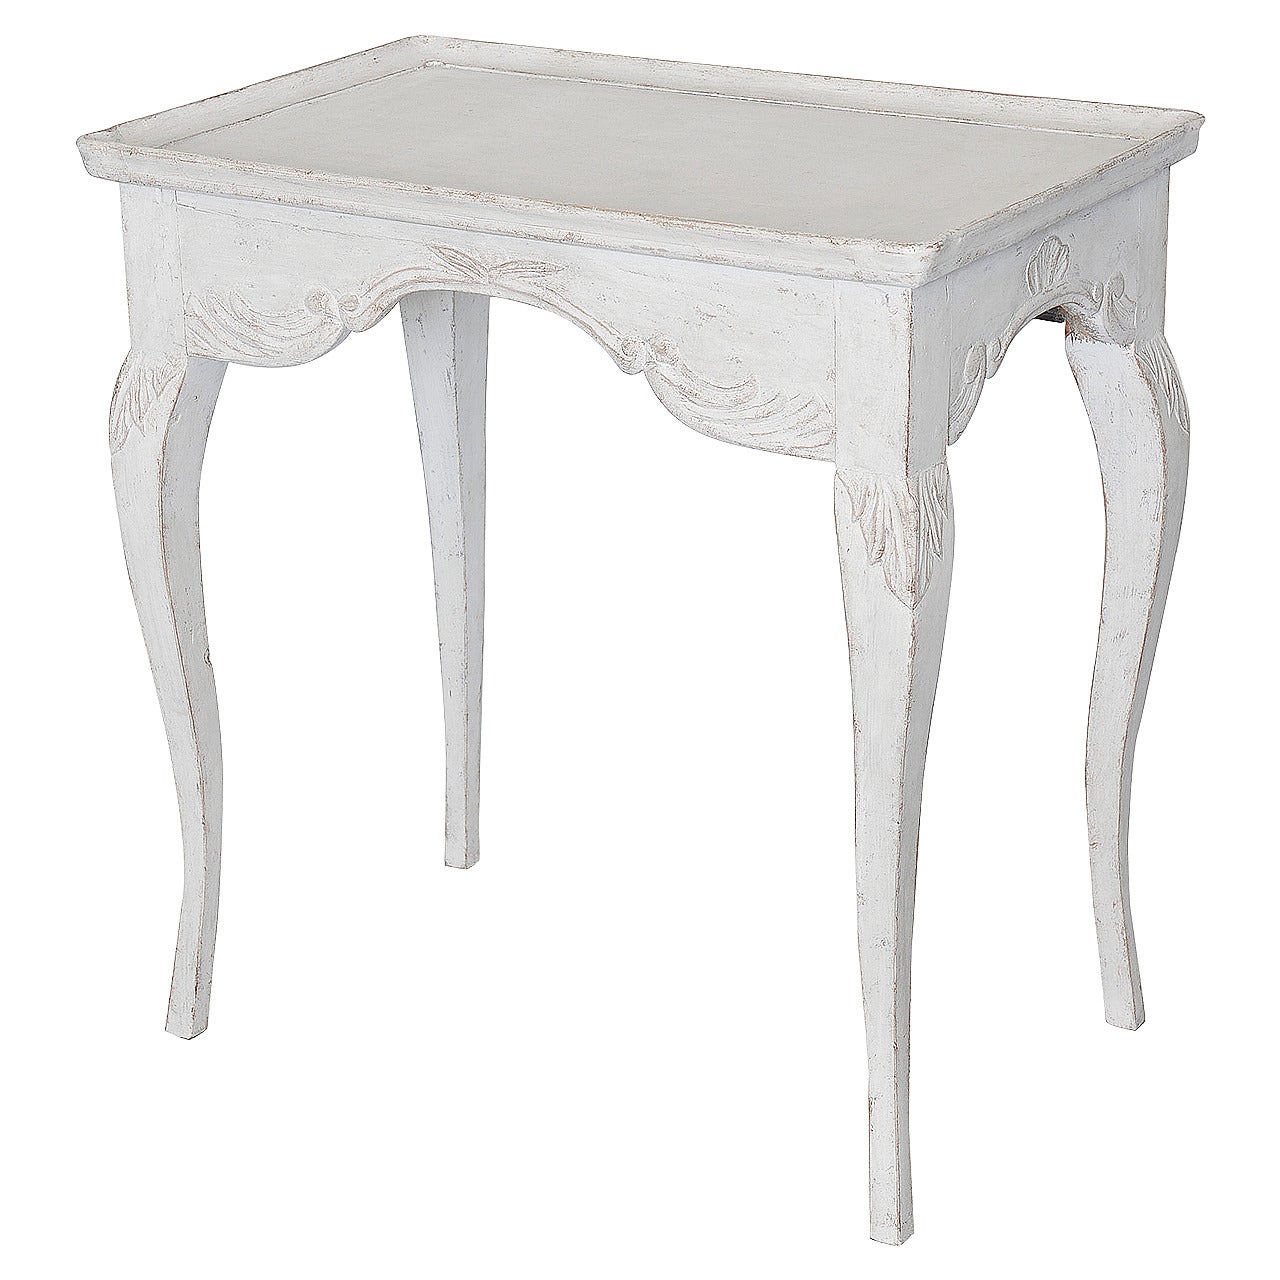 Late 18th Century Antique Swedish Gustavian Baroque Table For Sale